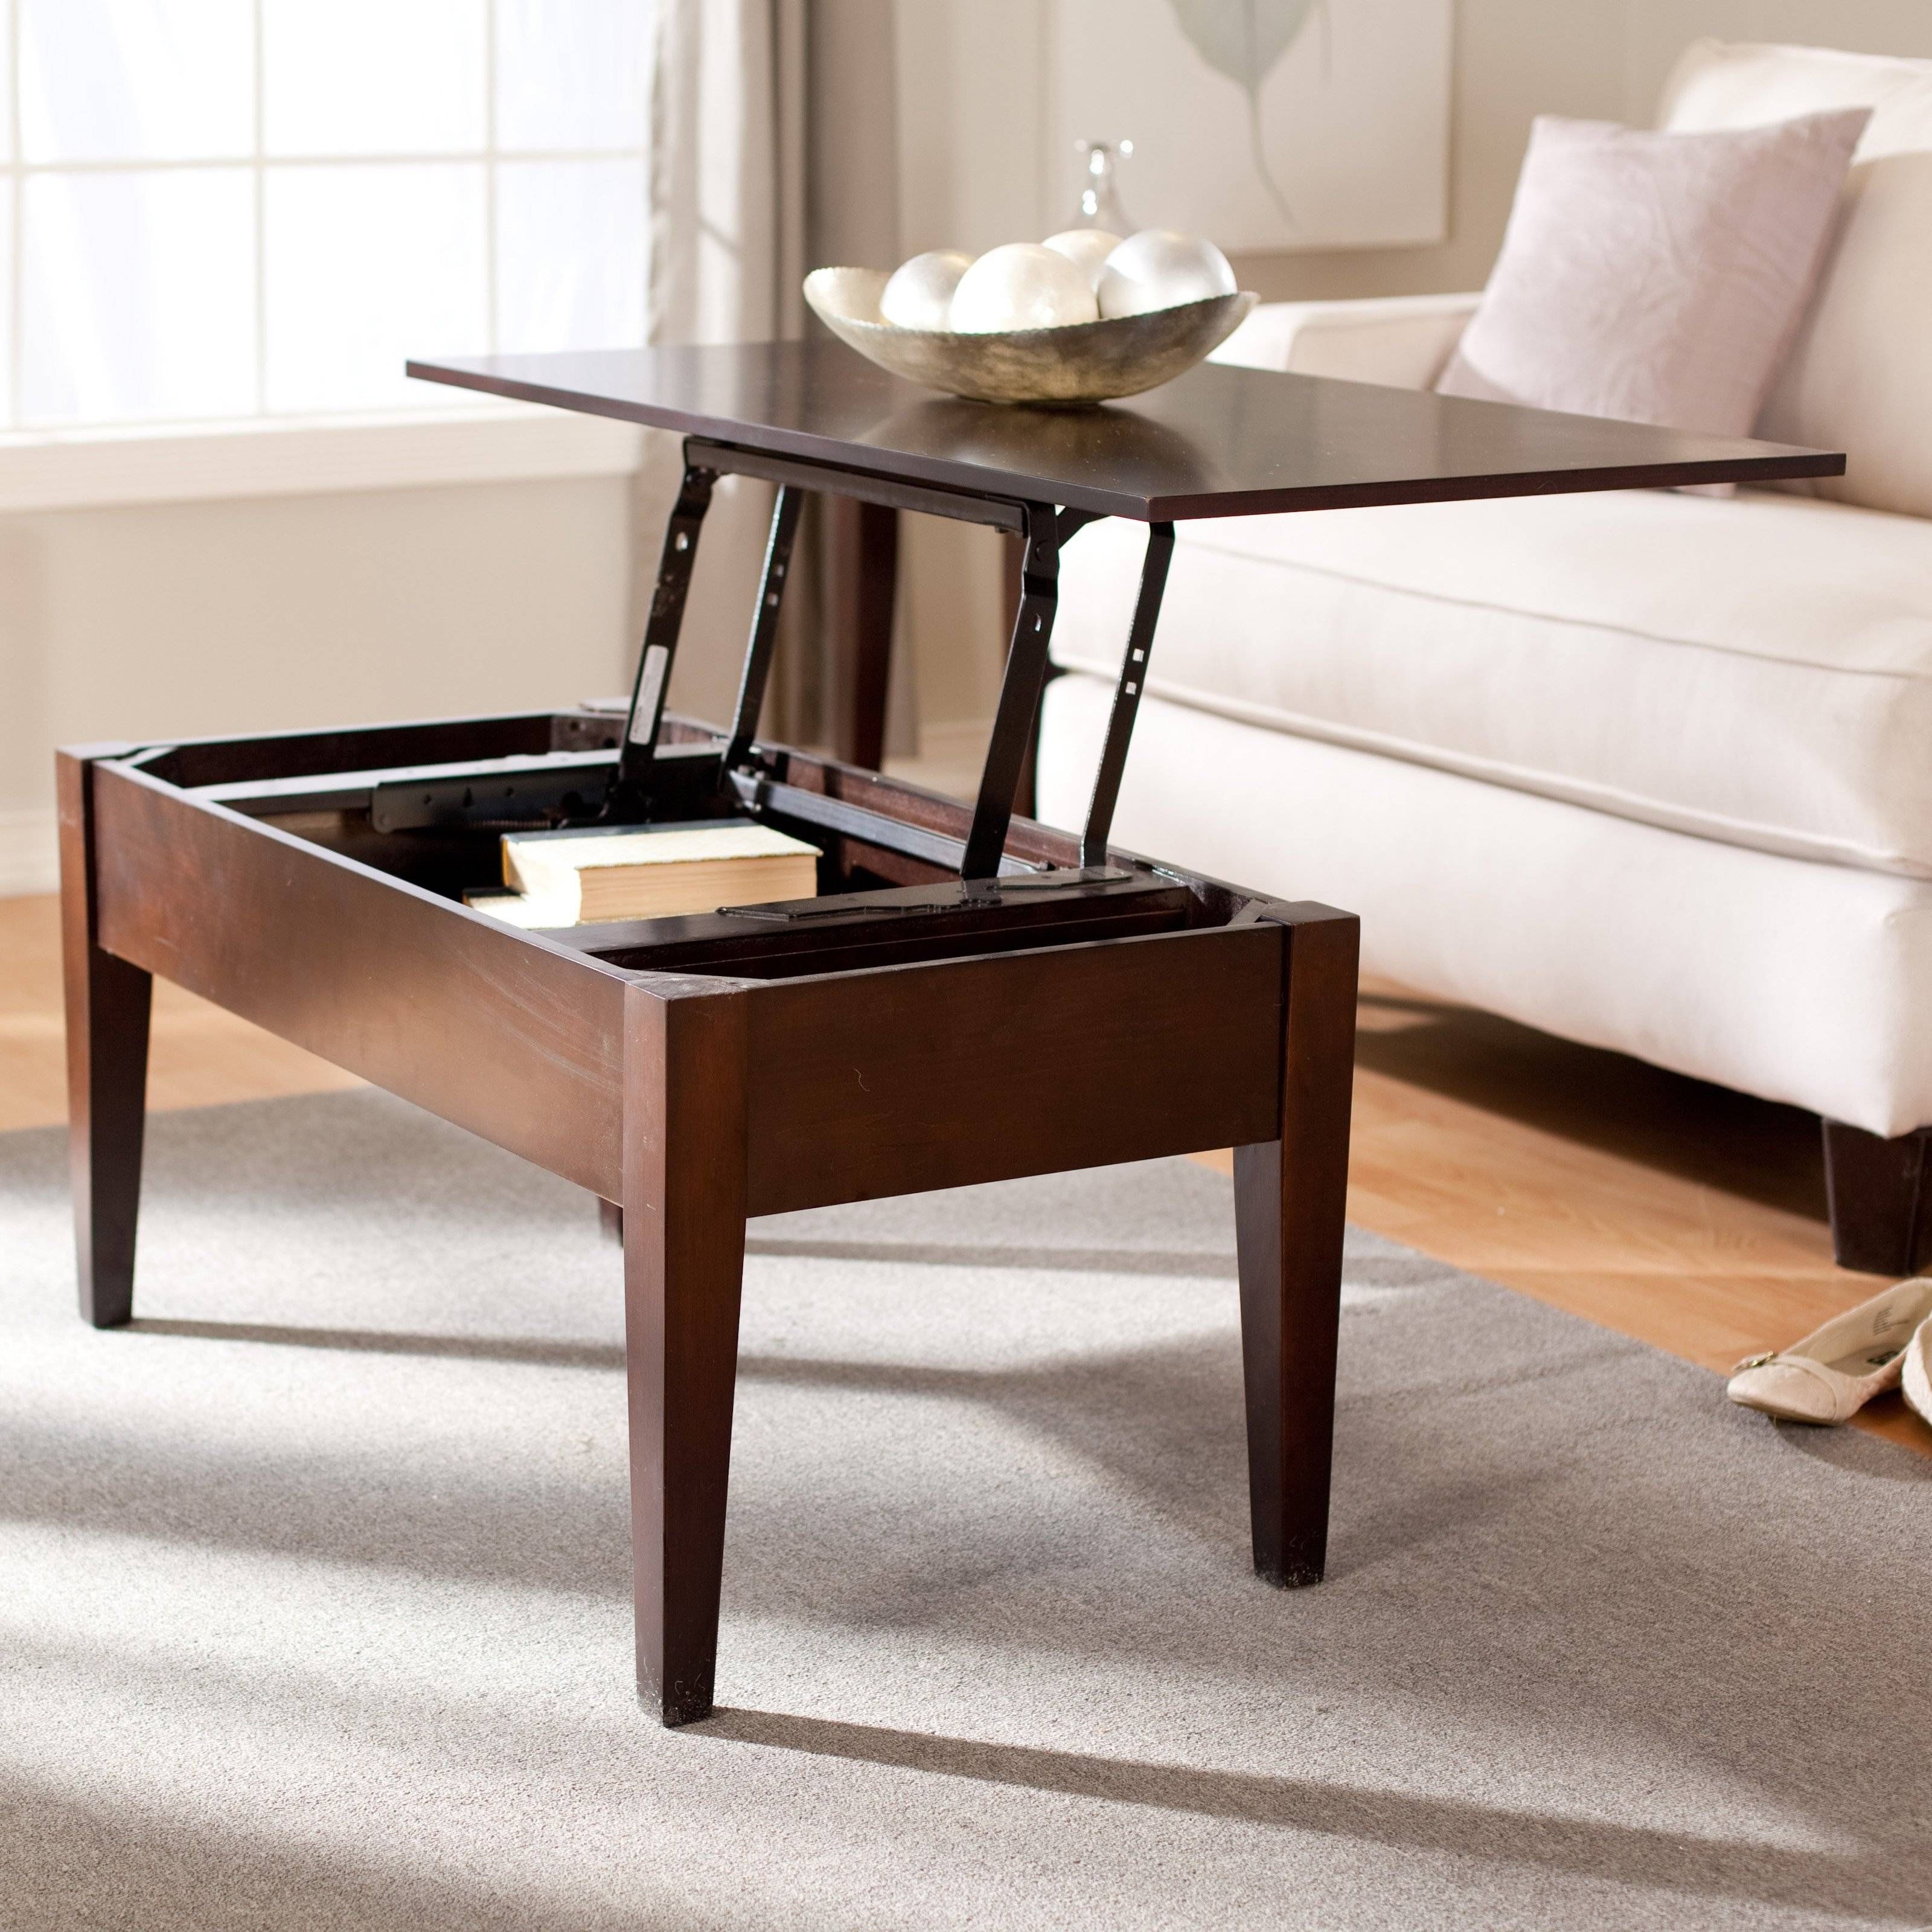 Turner Lift Top Coffee Table – Espresso | Hayneedle In Coffee Table With Raised Top (View 3 of 30)